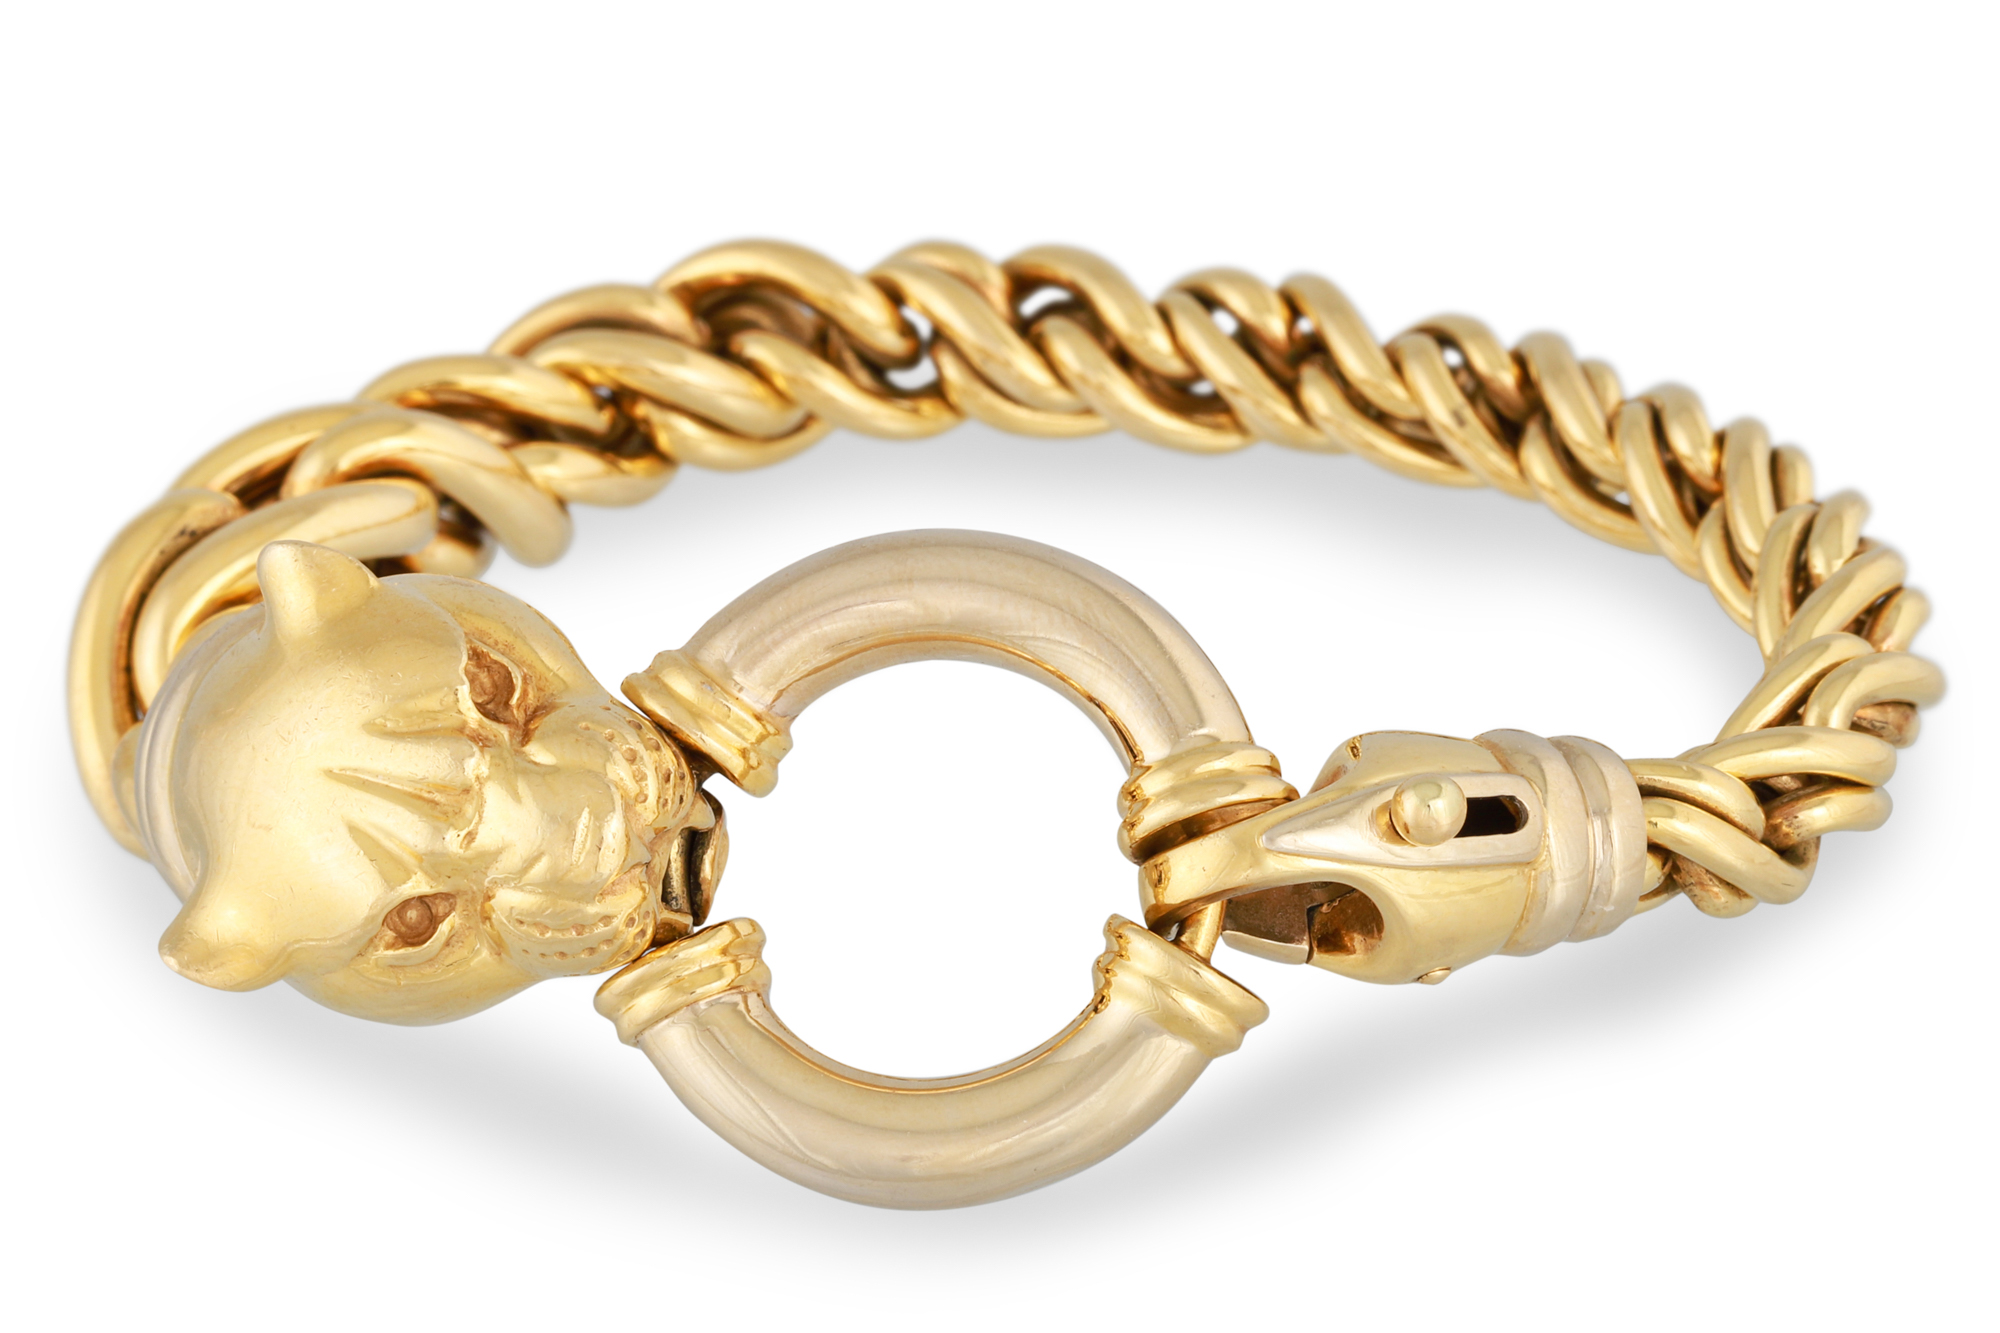 AN 18CT GOLD ITALIAN BRACELET, the rope link chain terminating in a panther's head, 70 g. - Image 2 of 2